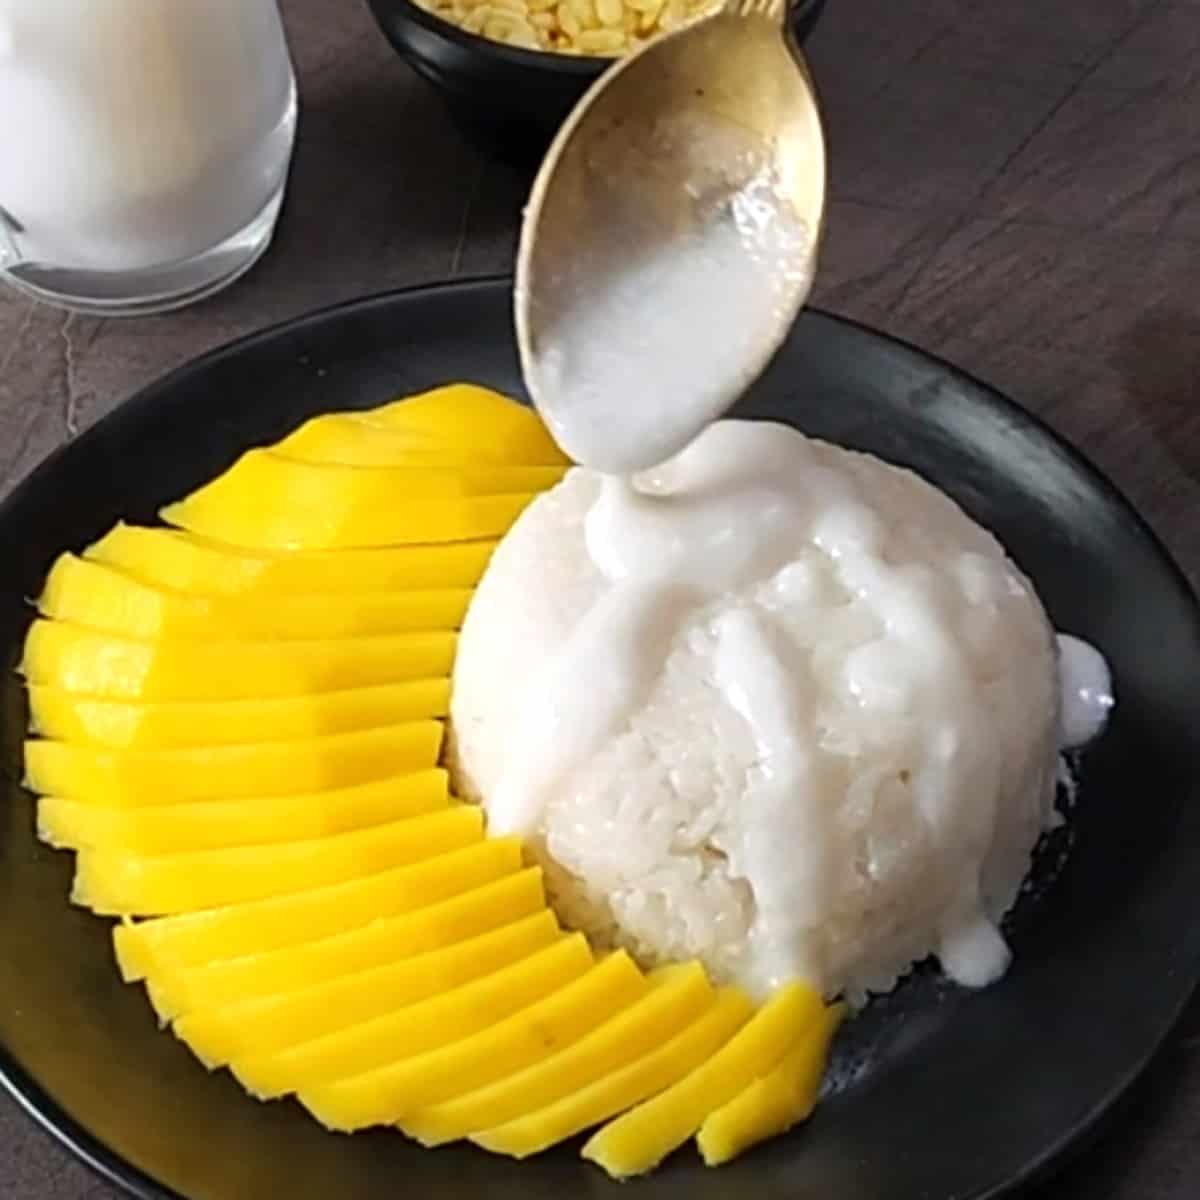 Pour salted coconut sauce over a small portion of sticky rice placed in a black plate containing sliced mangoes.